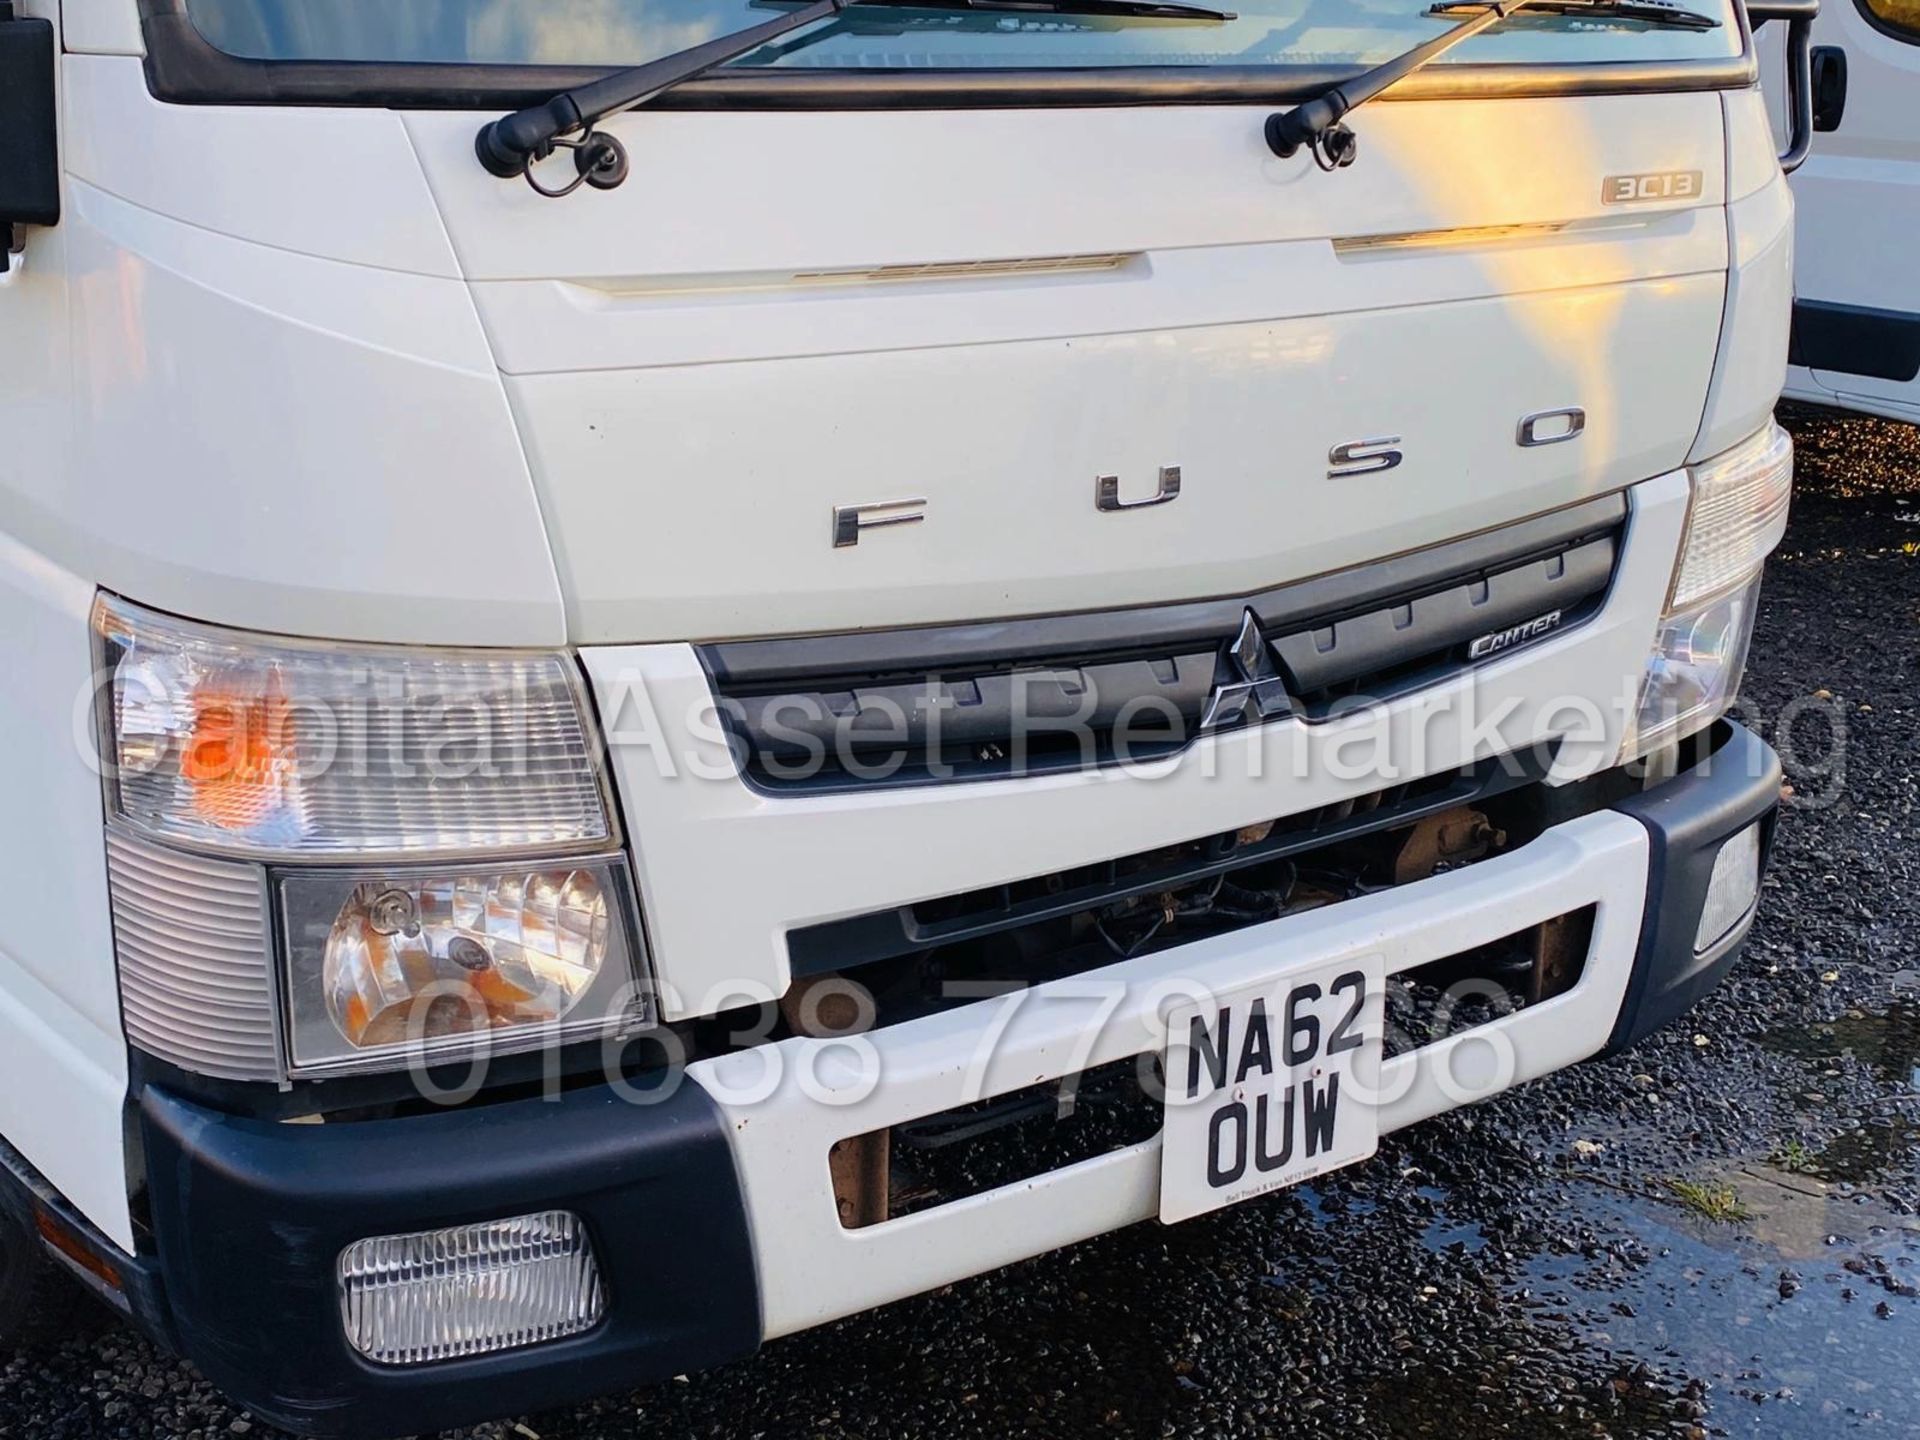 MITSUBISHI FUSO CANTER 3C13 38 *LWB - RECOVERY TRUCK* (2013) '3.0 DIESEL - 130 BHP - AUTOMATIC' - Image 10 of 23